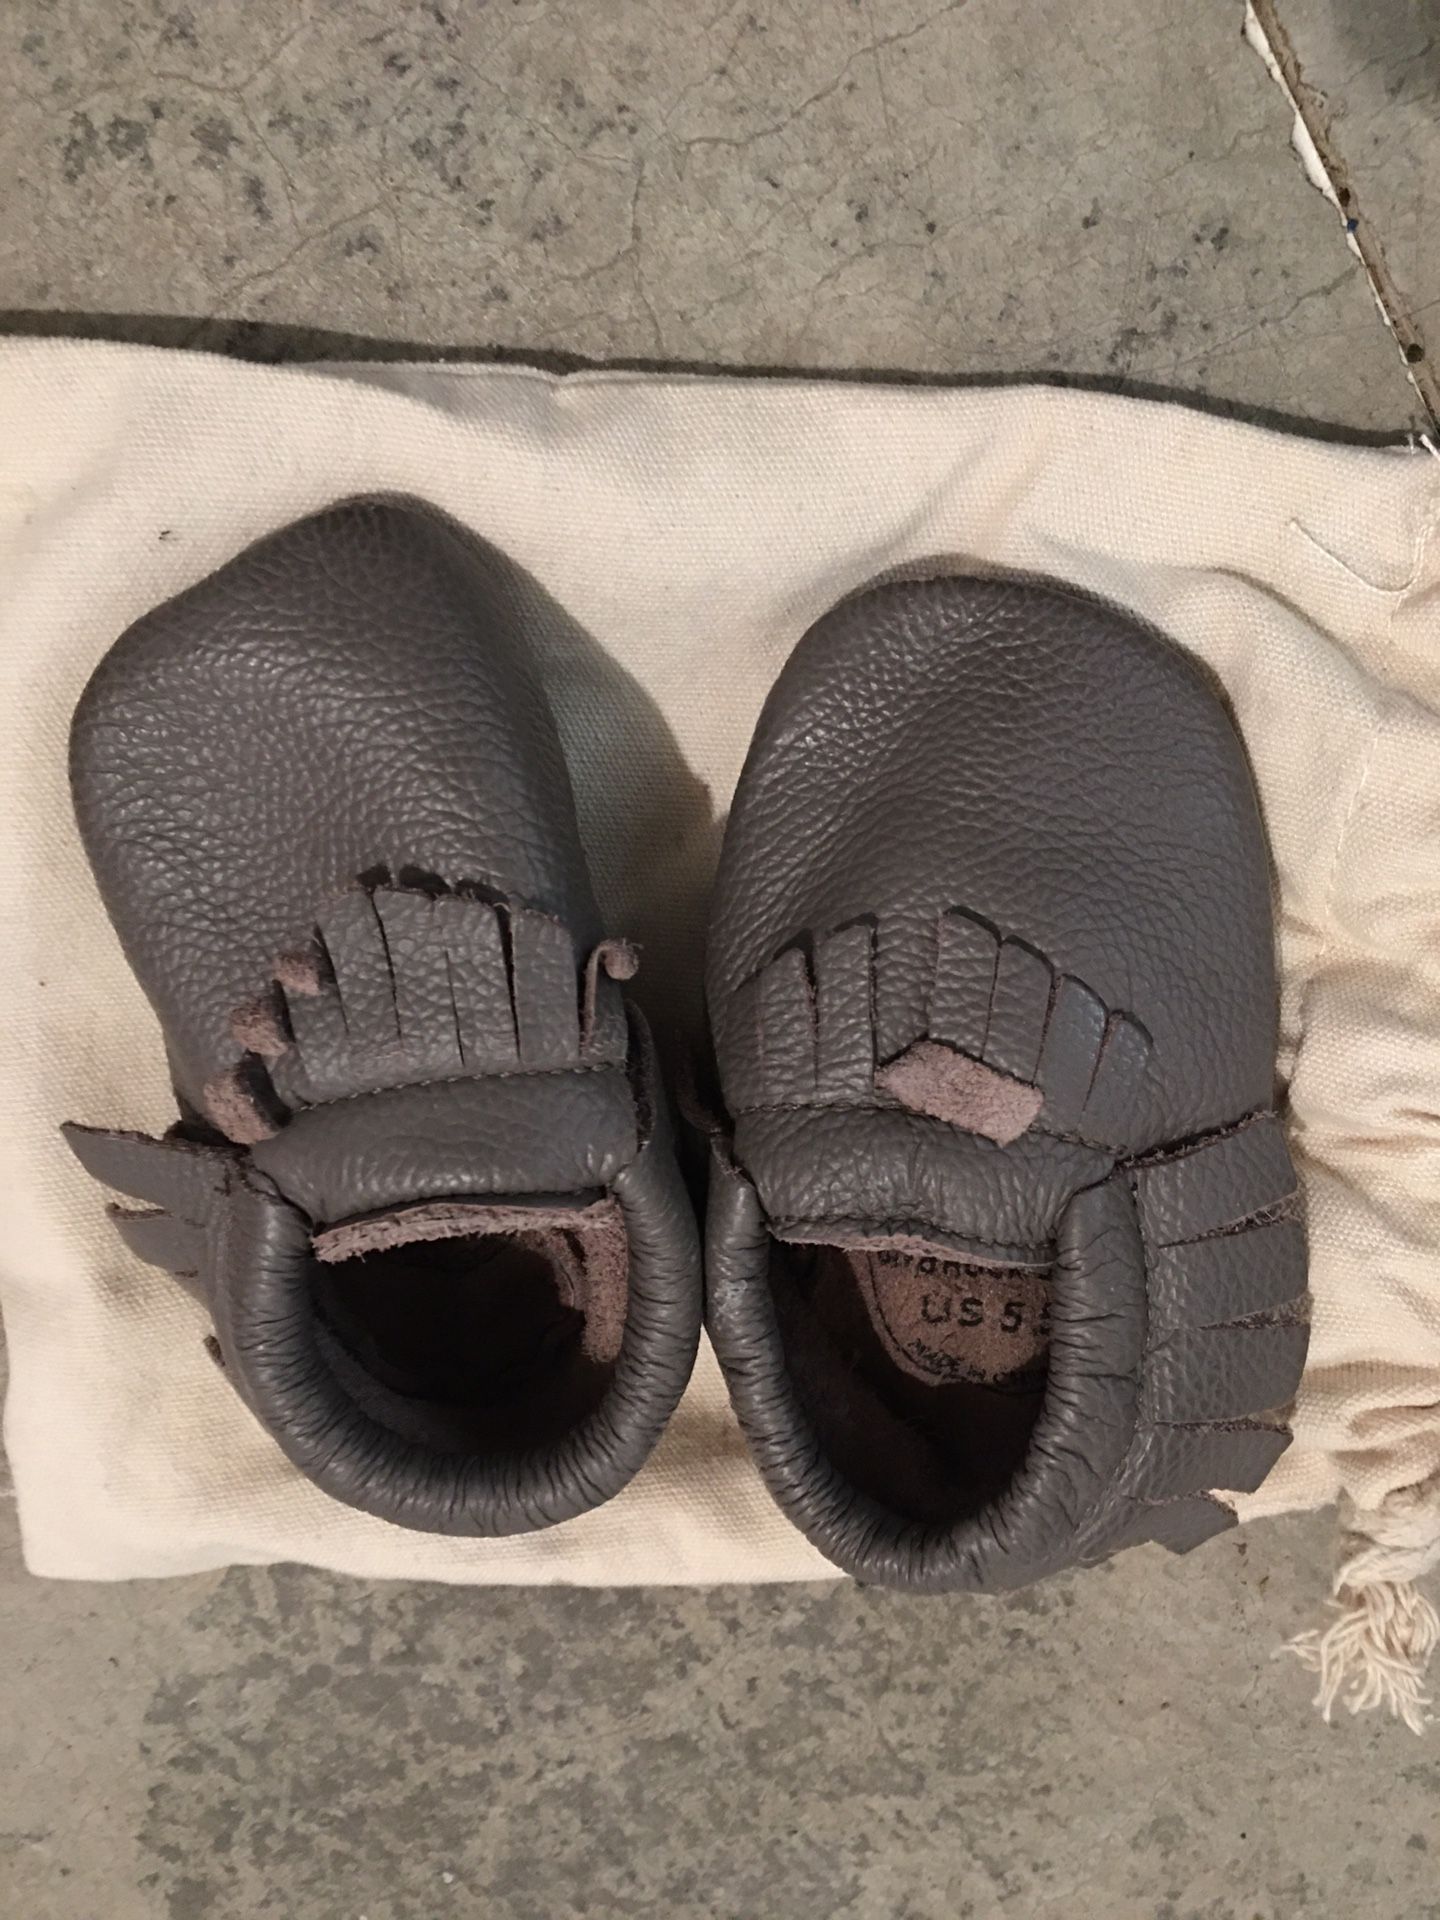 Baby shoes size 5.5